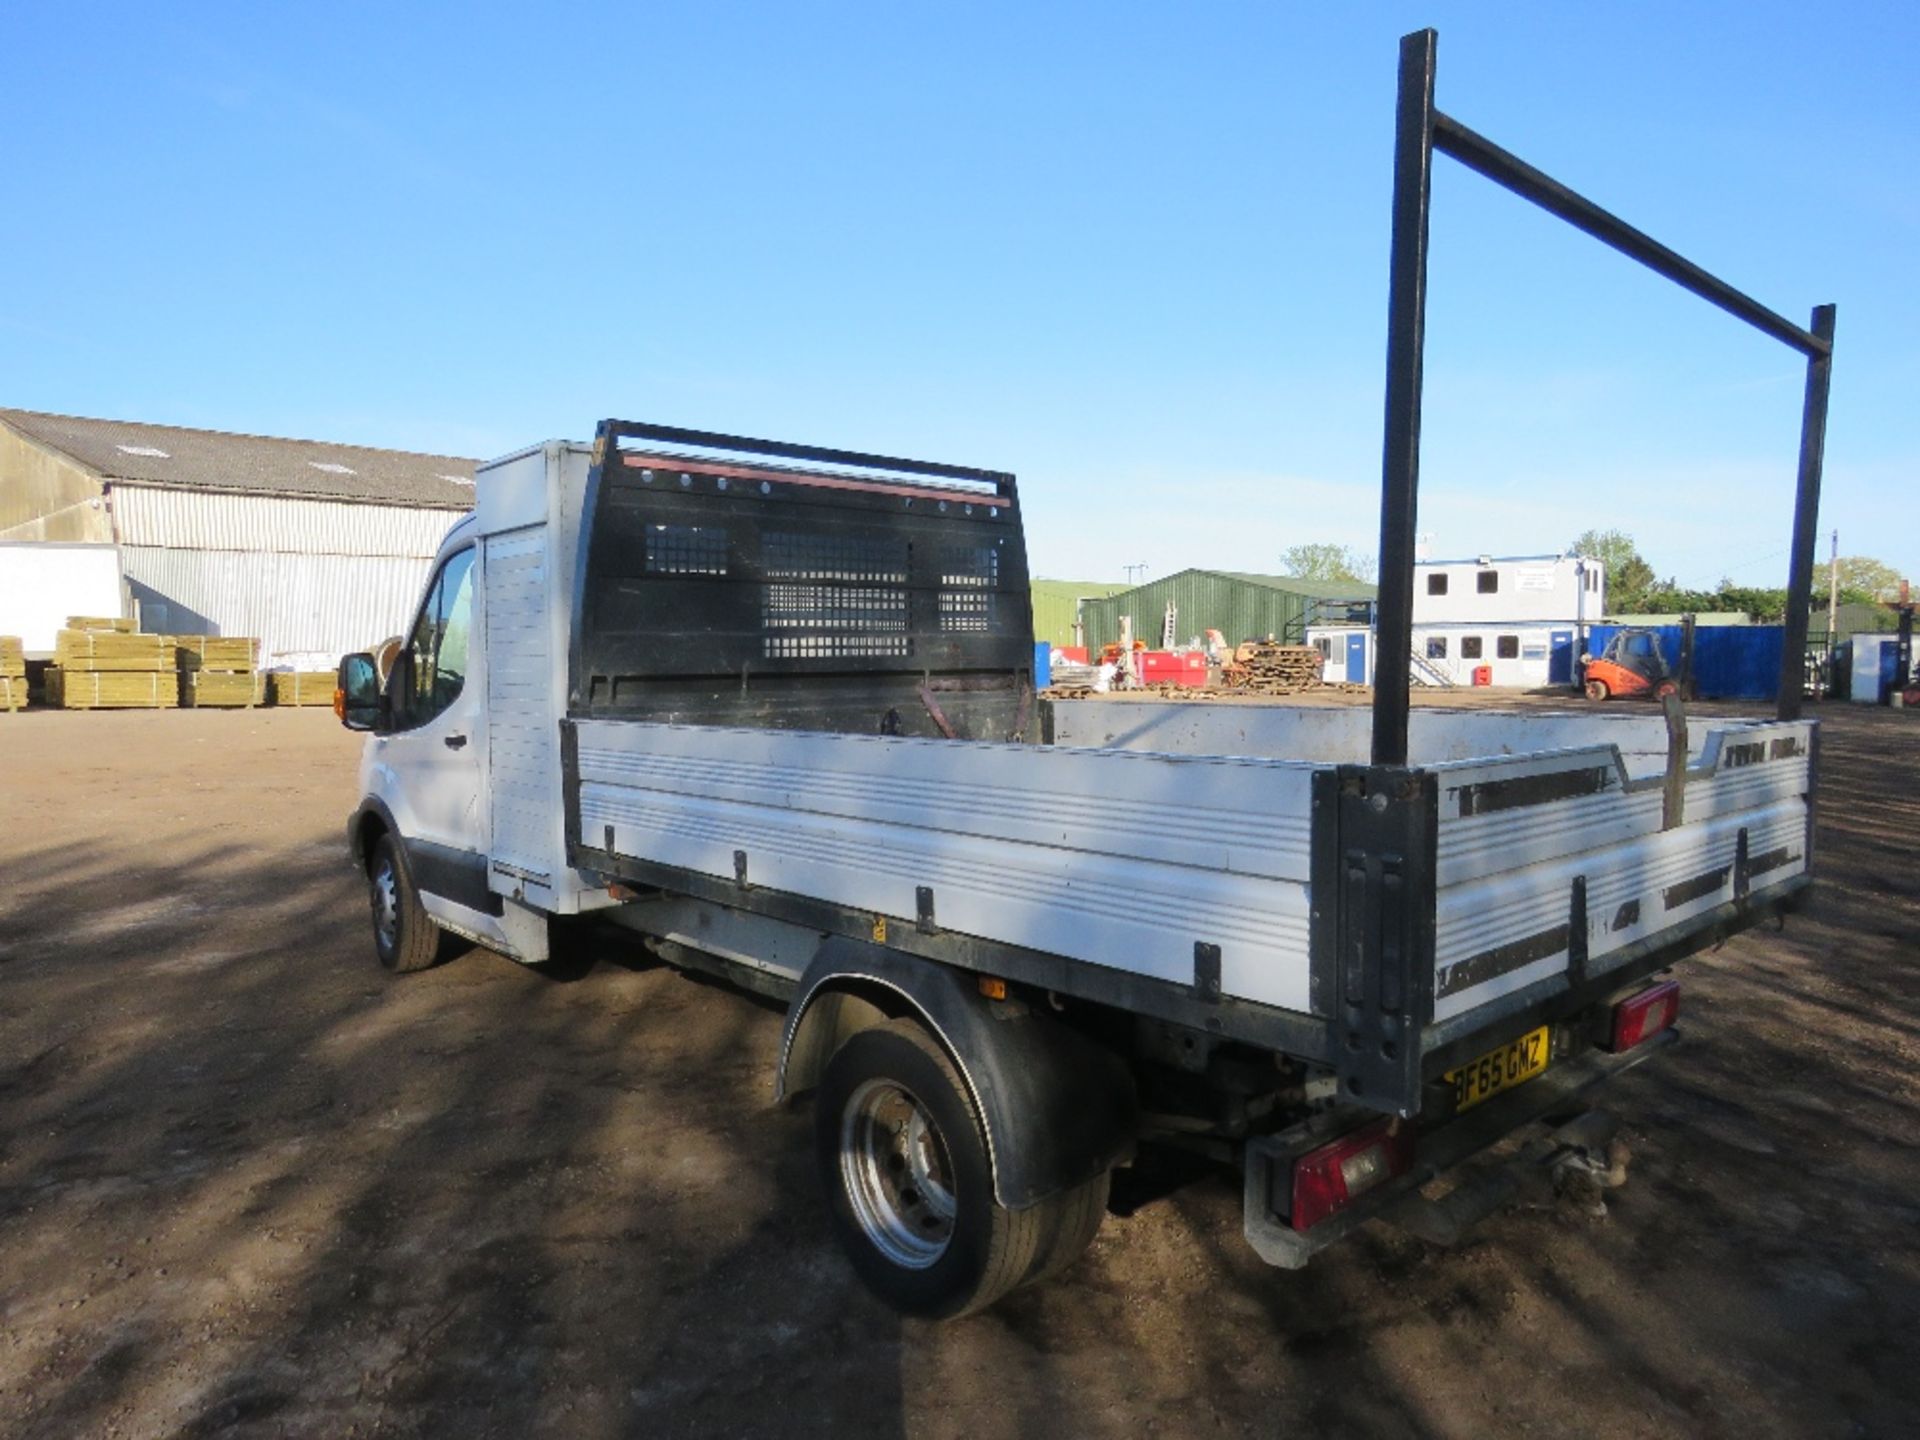 FORD TRANSIT TIPPER TRUCK WITH TOOL STORAGE LOCKER REG:BF65 GMZ. WITH V5 AND MOT UNTIL15.04.25. FIRS - Image 5 of 17